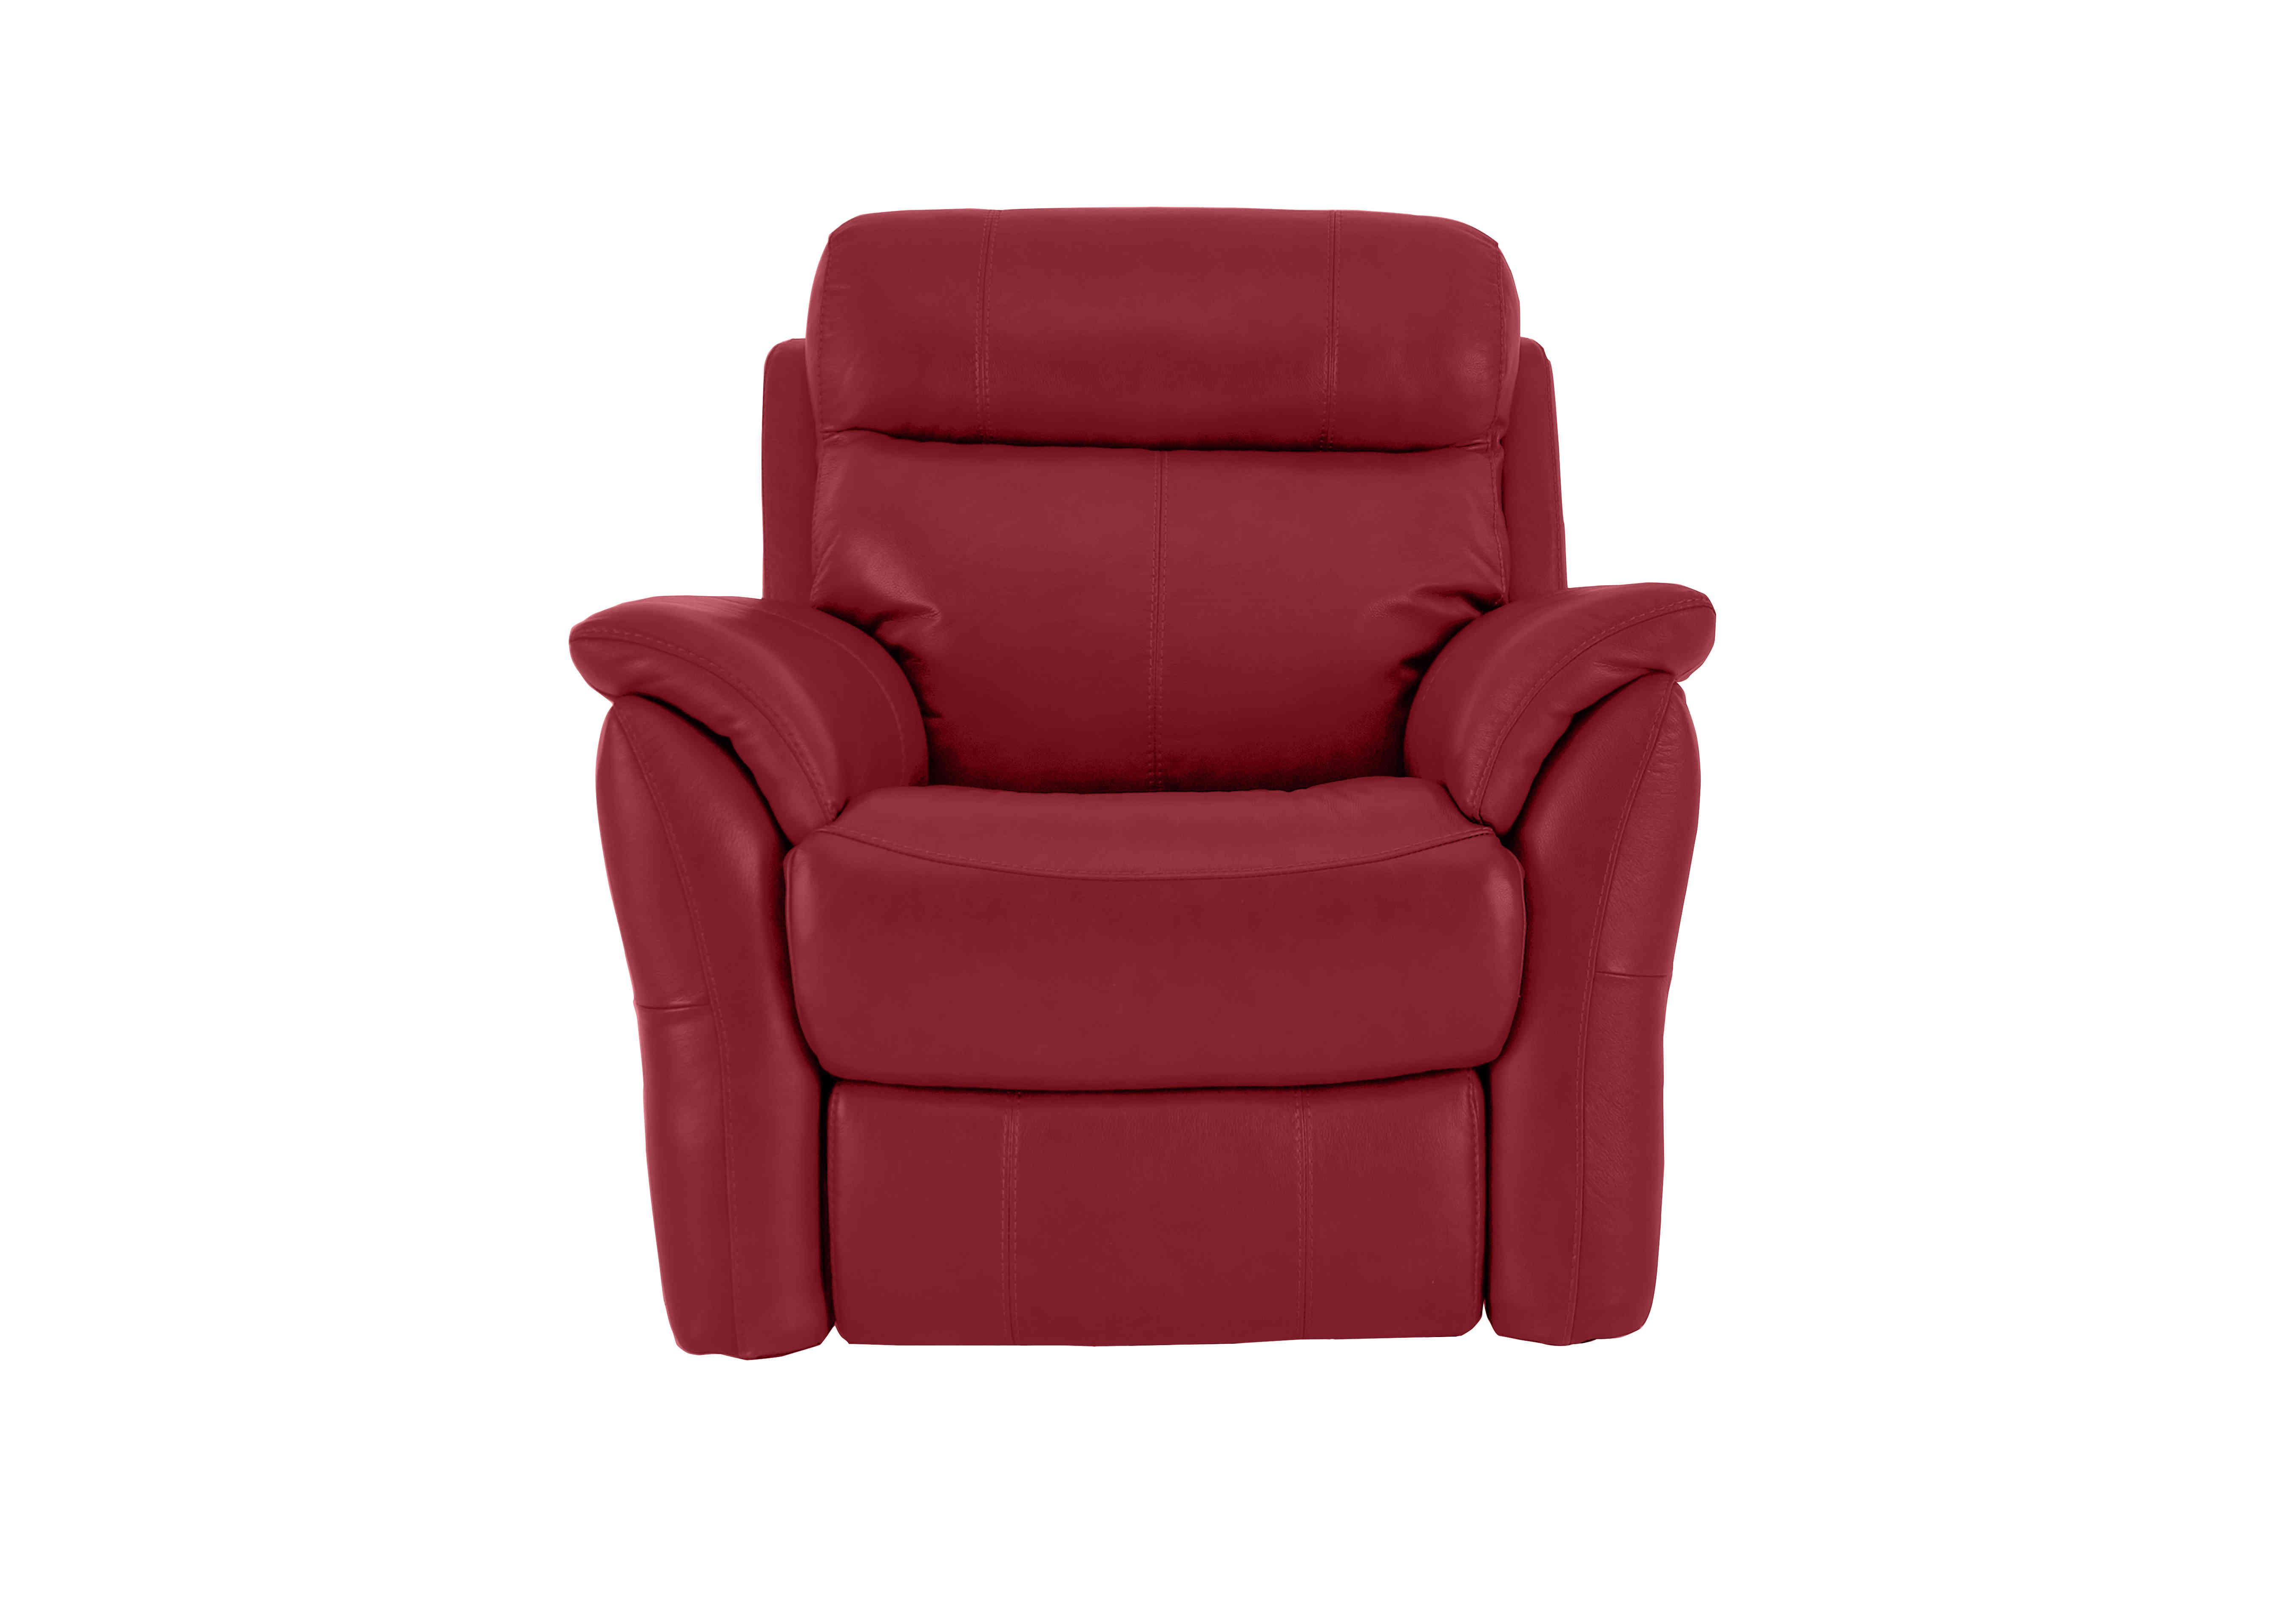 Relax Station Revive Leather Armchair in Bv-0008 Pure Red on Furniture Village